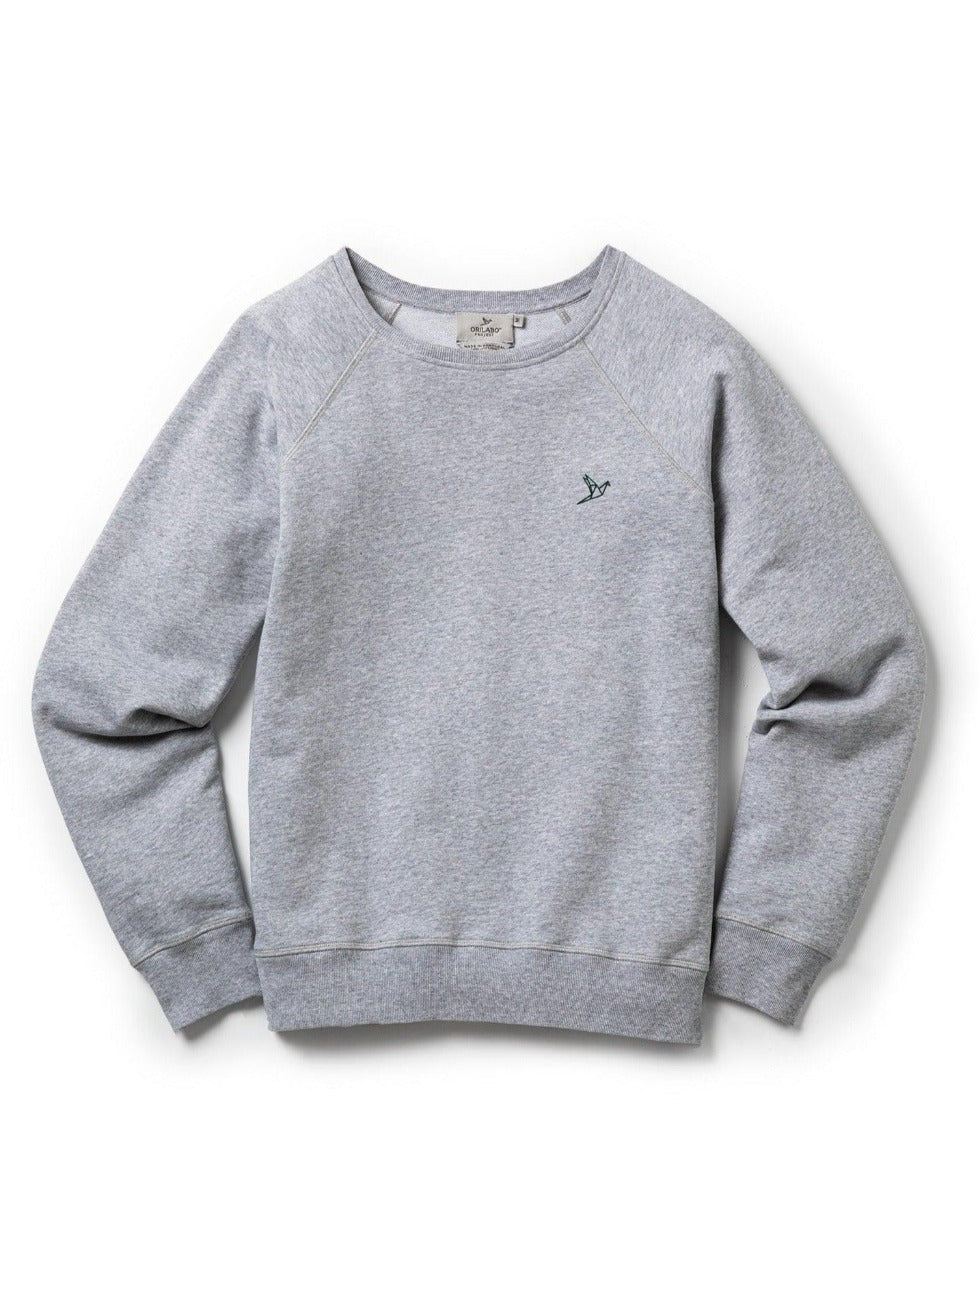 Men's ORILABO Mid-weight Terry Crewneck - Grey - ORILABO Project